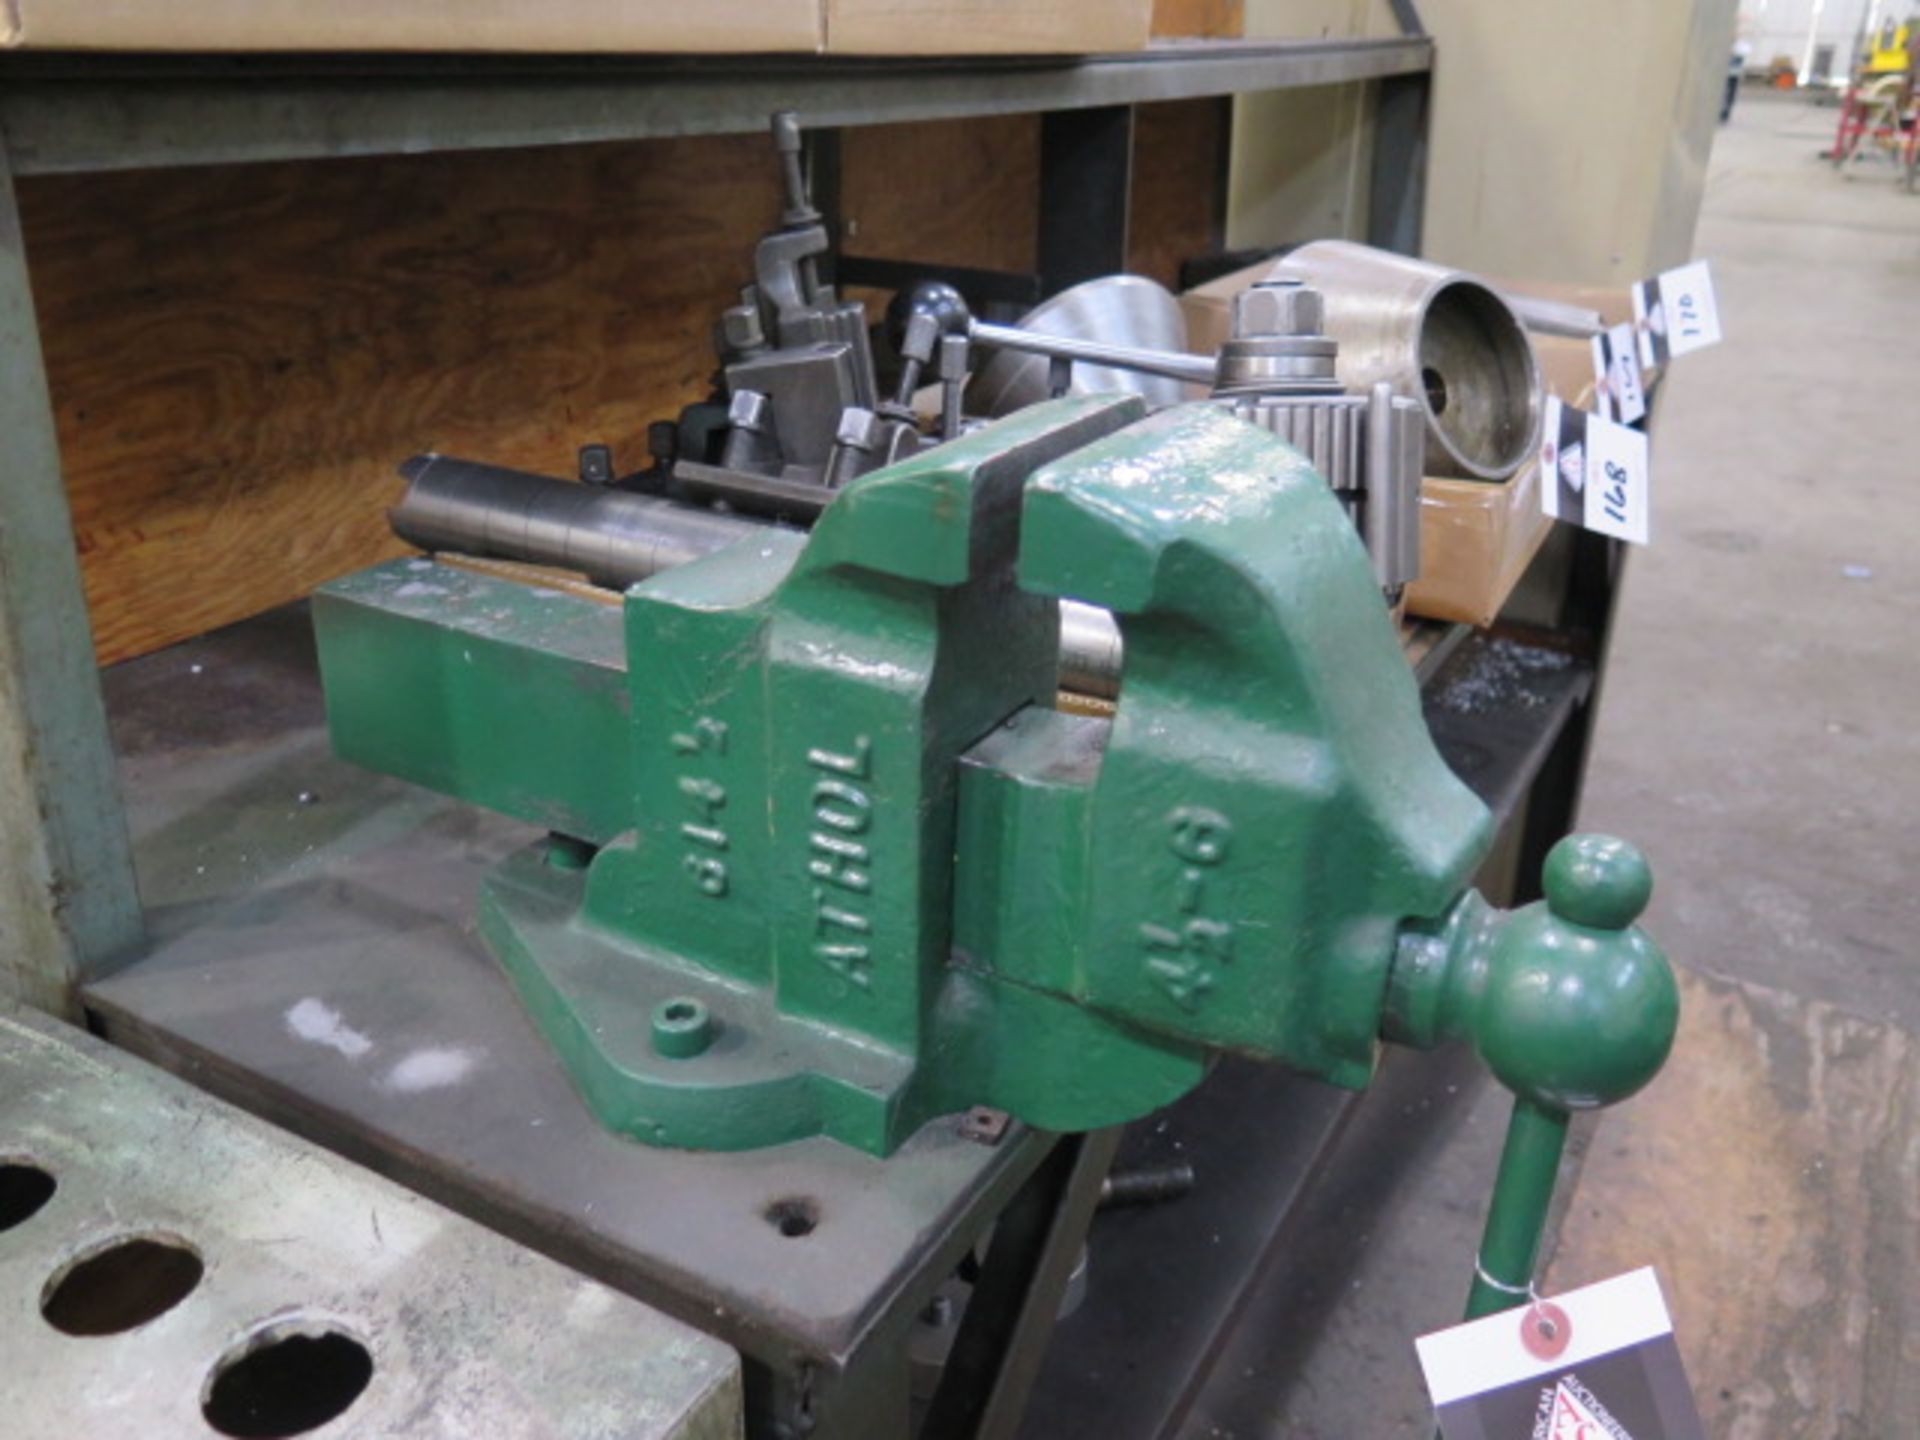 Work Bench w/ Athol Bench Vise (SOLD AS-IS - NO WARRANTY) - Image 3 of 3